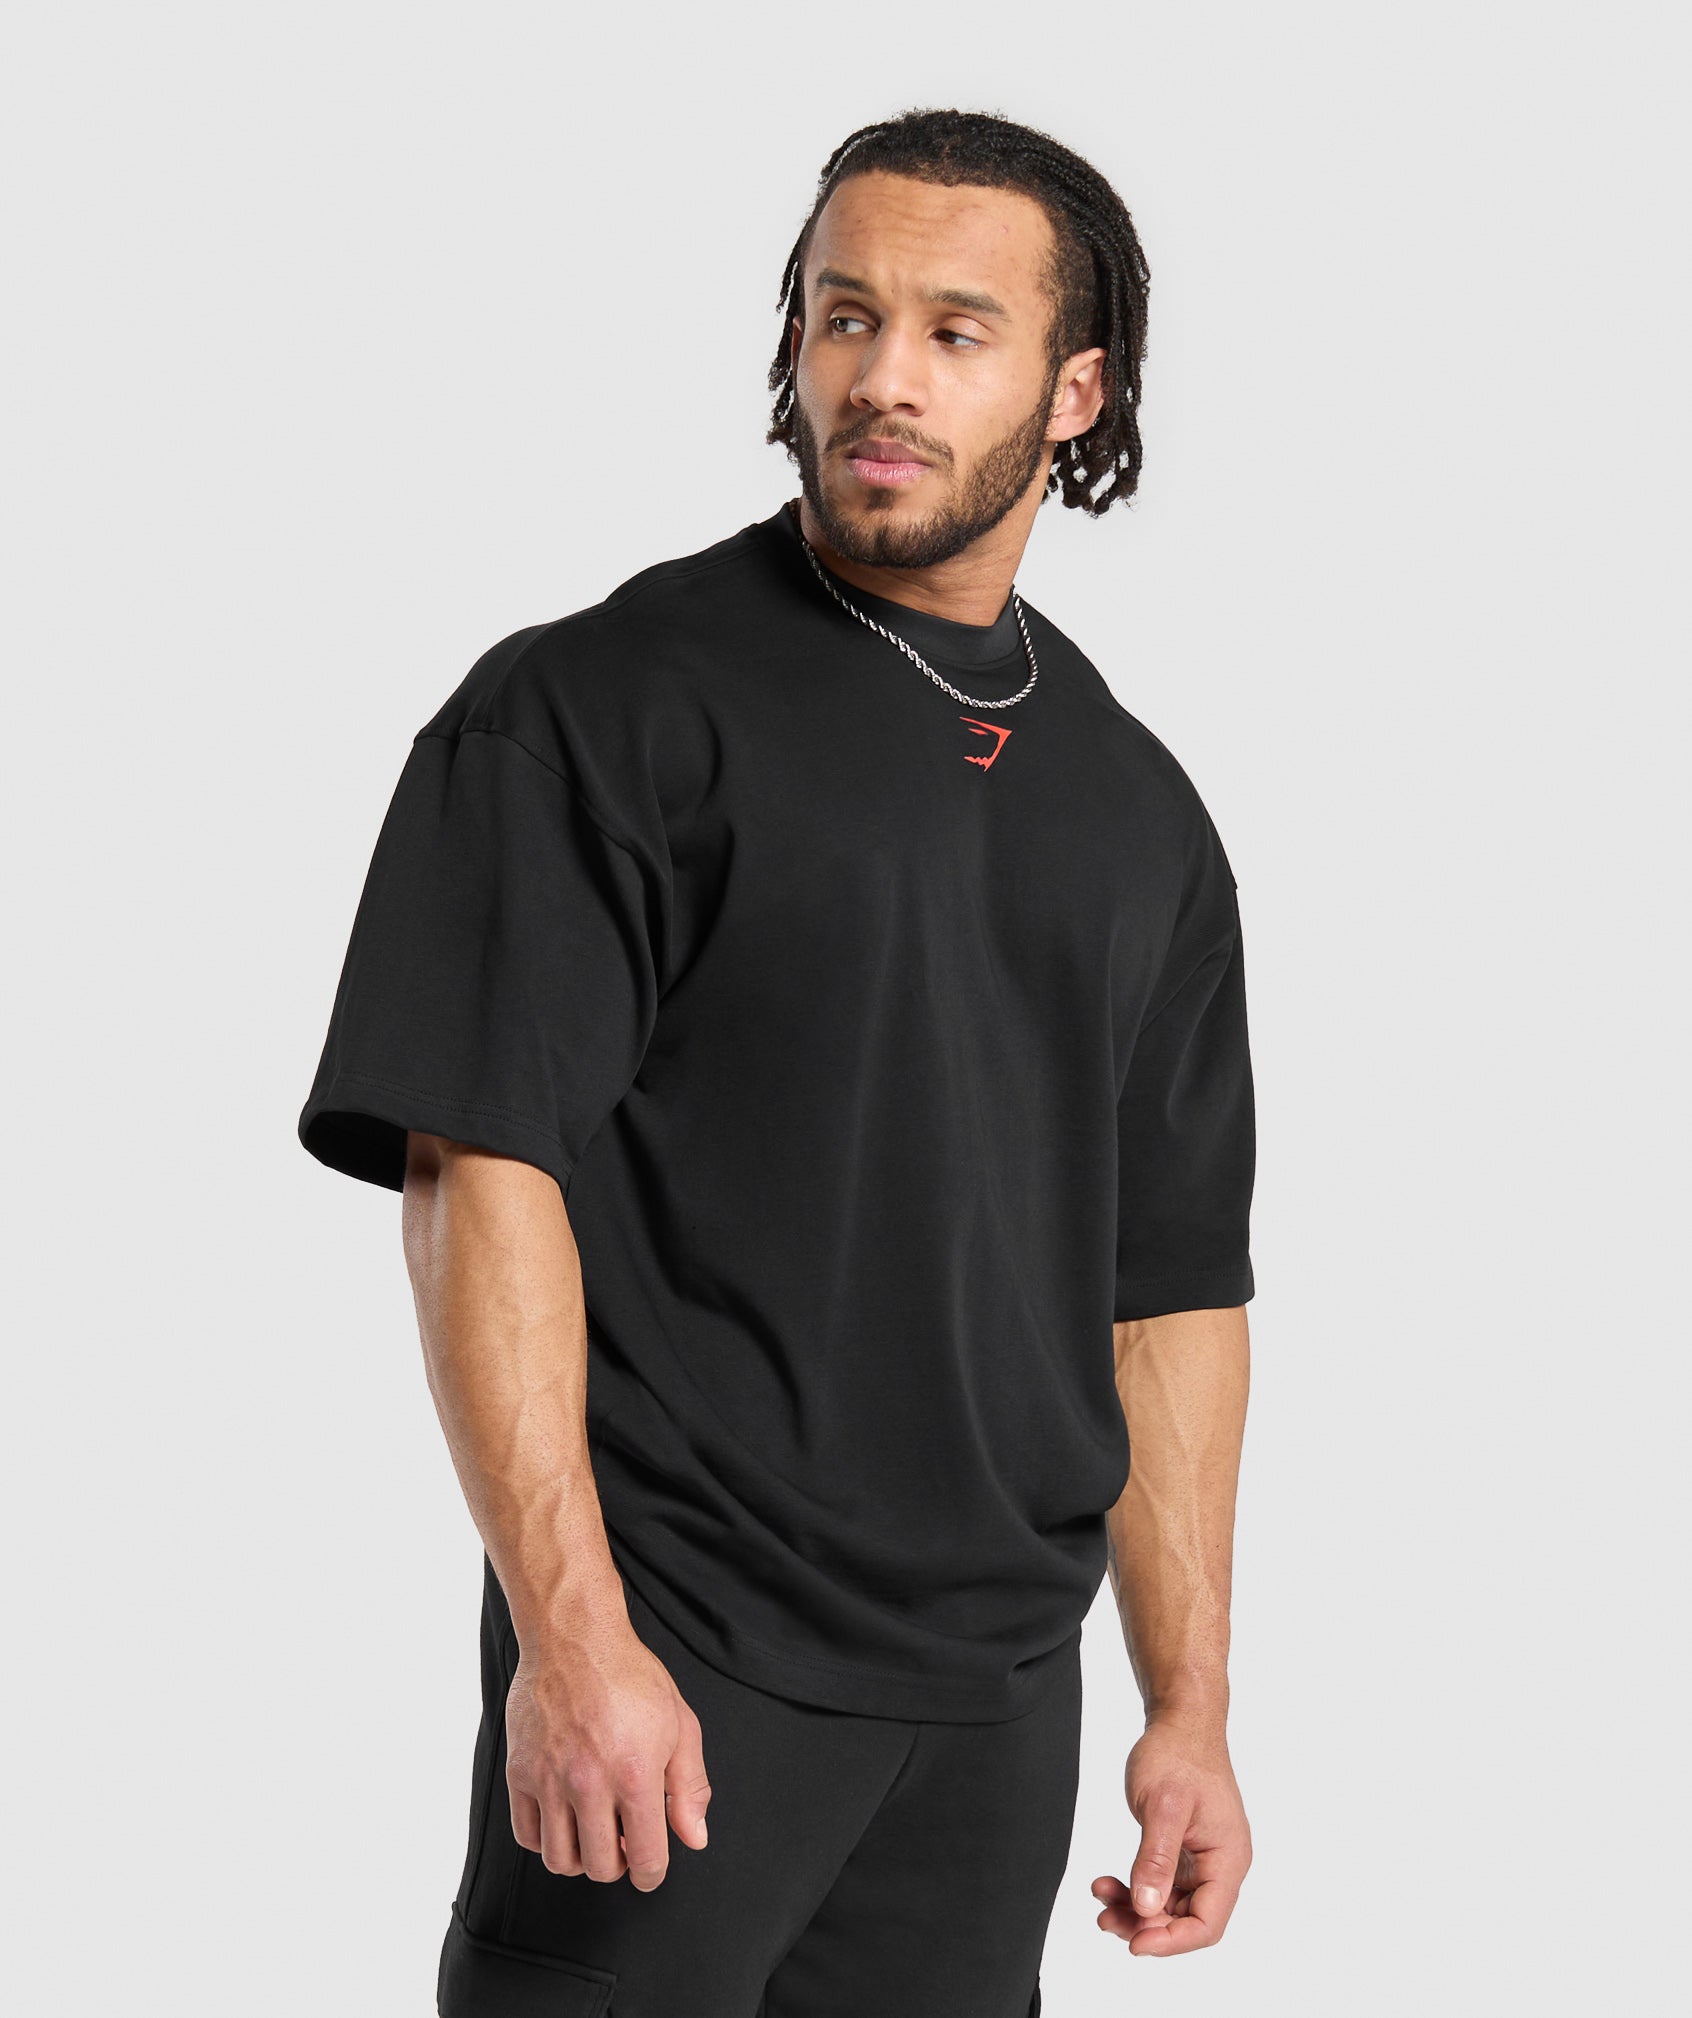 Sets N Reps T-Shirt in Black - view 3